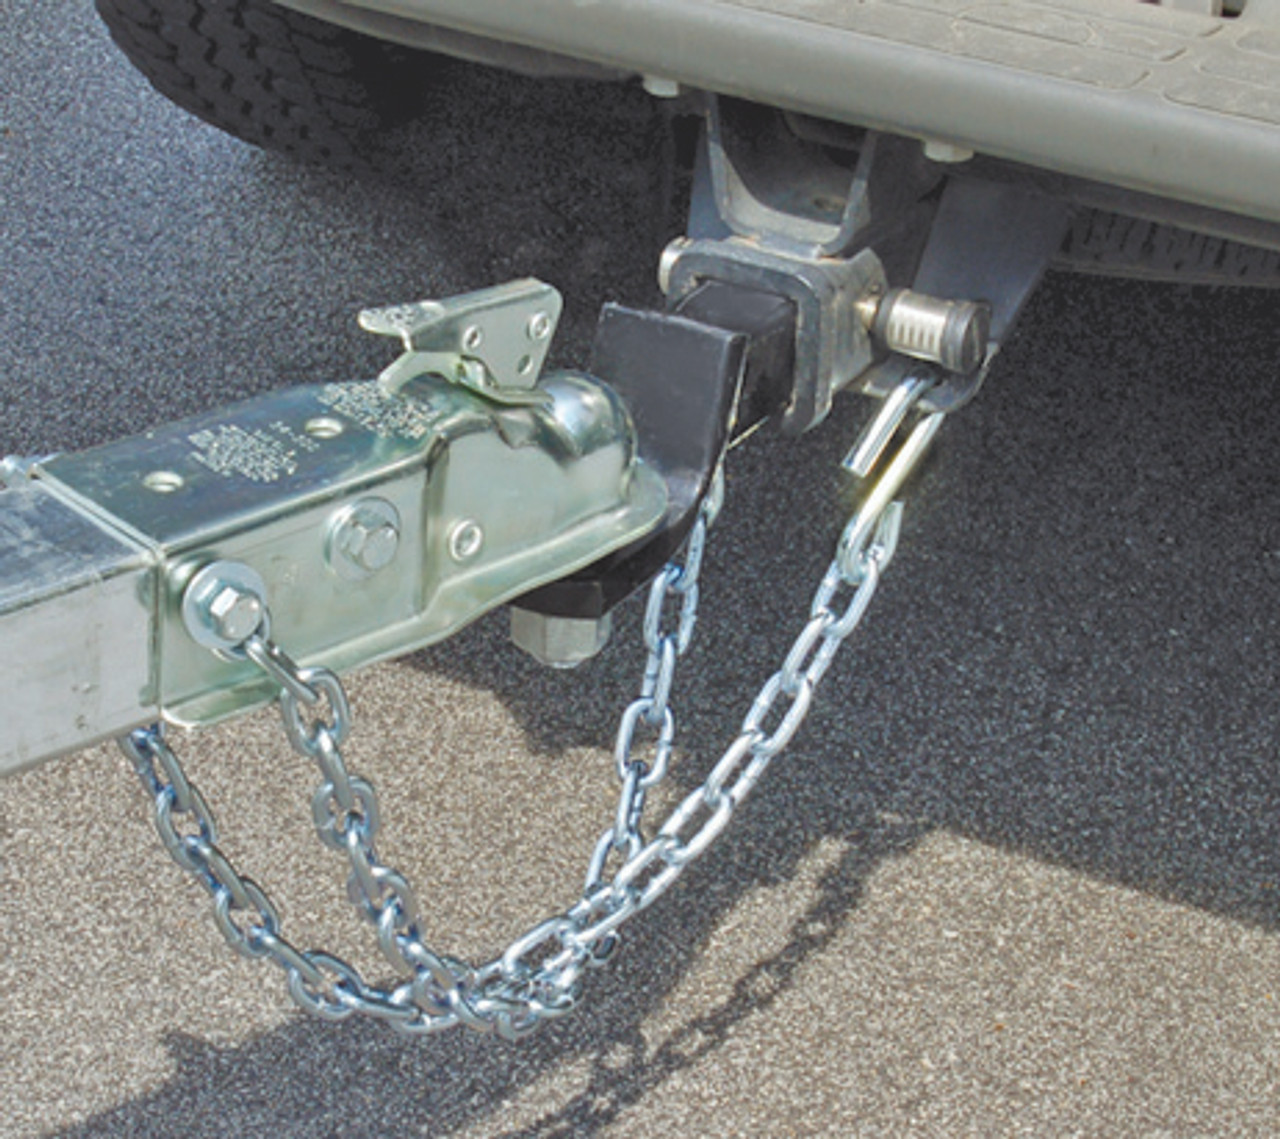 Tie Down Engineering 81205 36 Safety Chain with Hooks